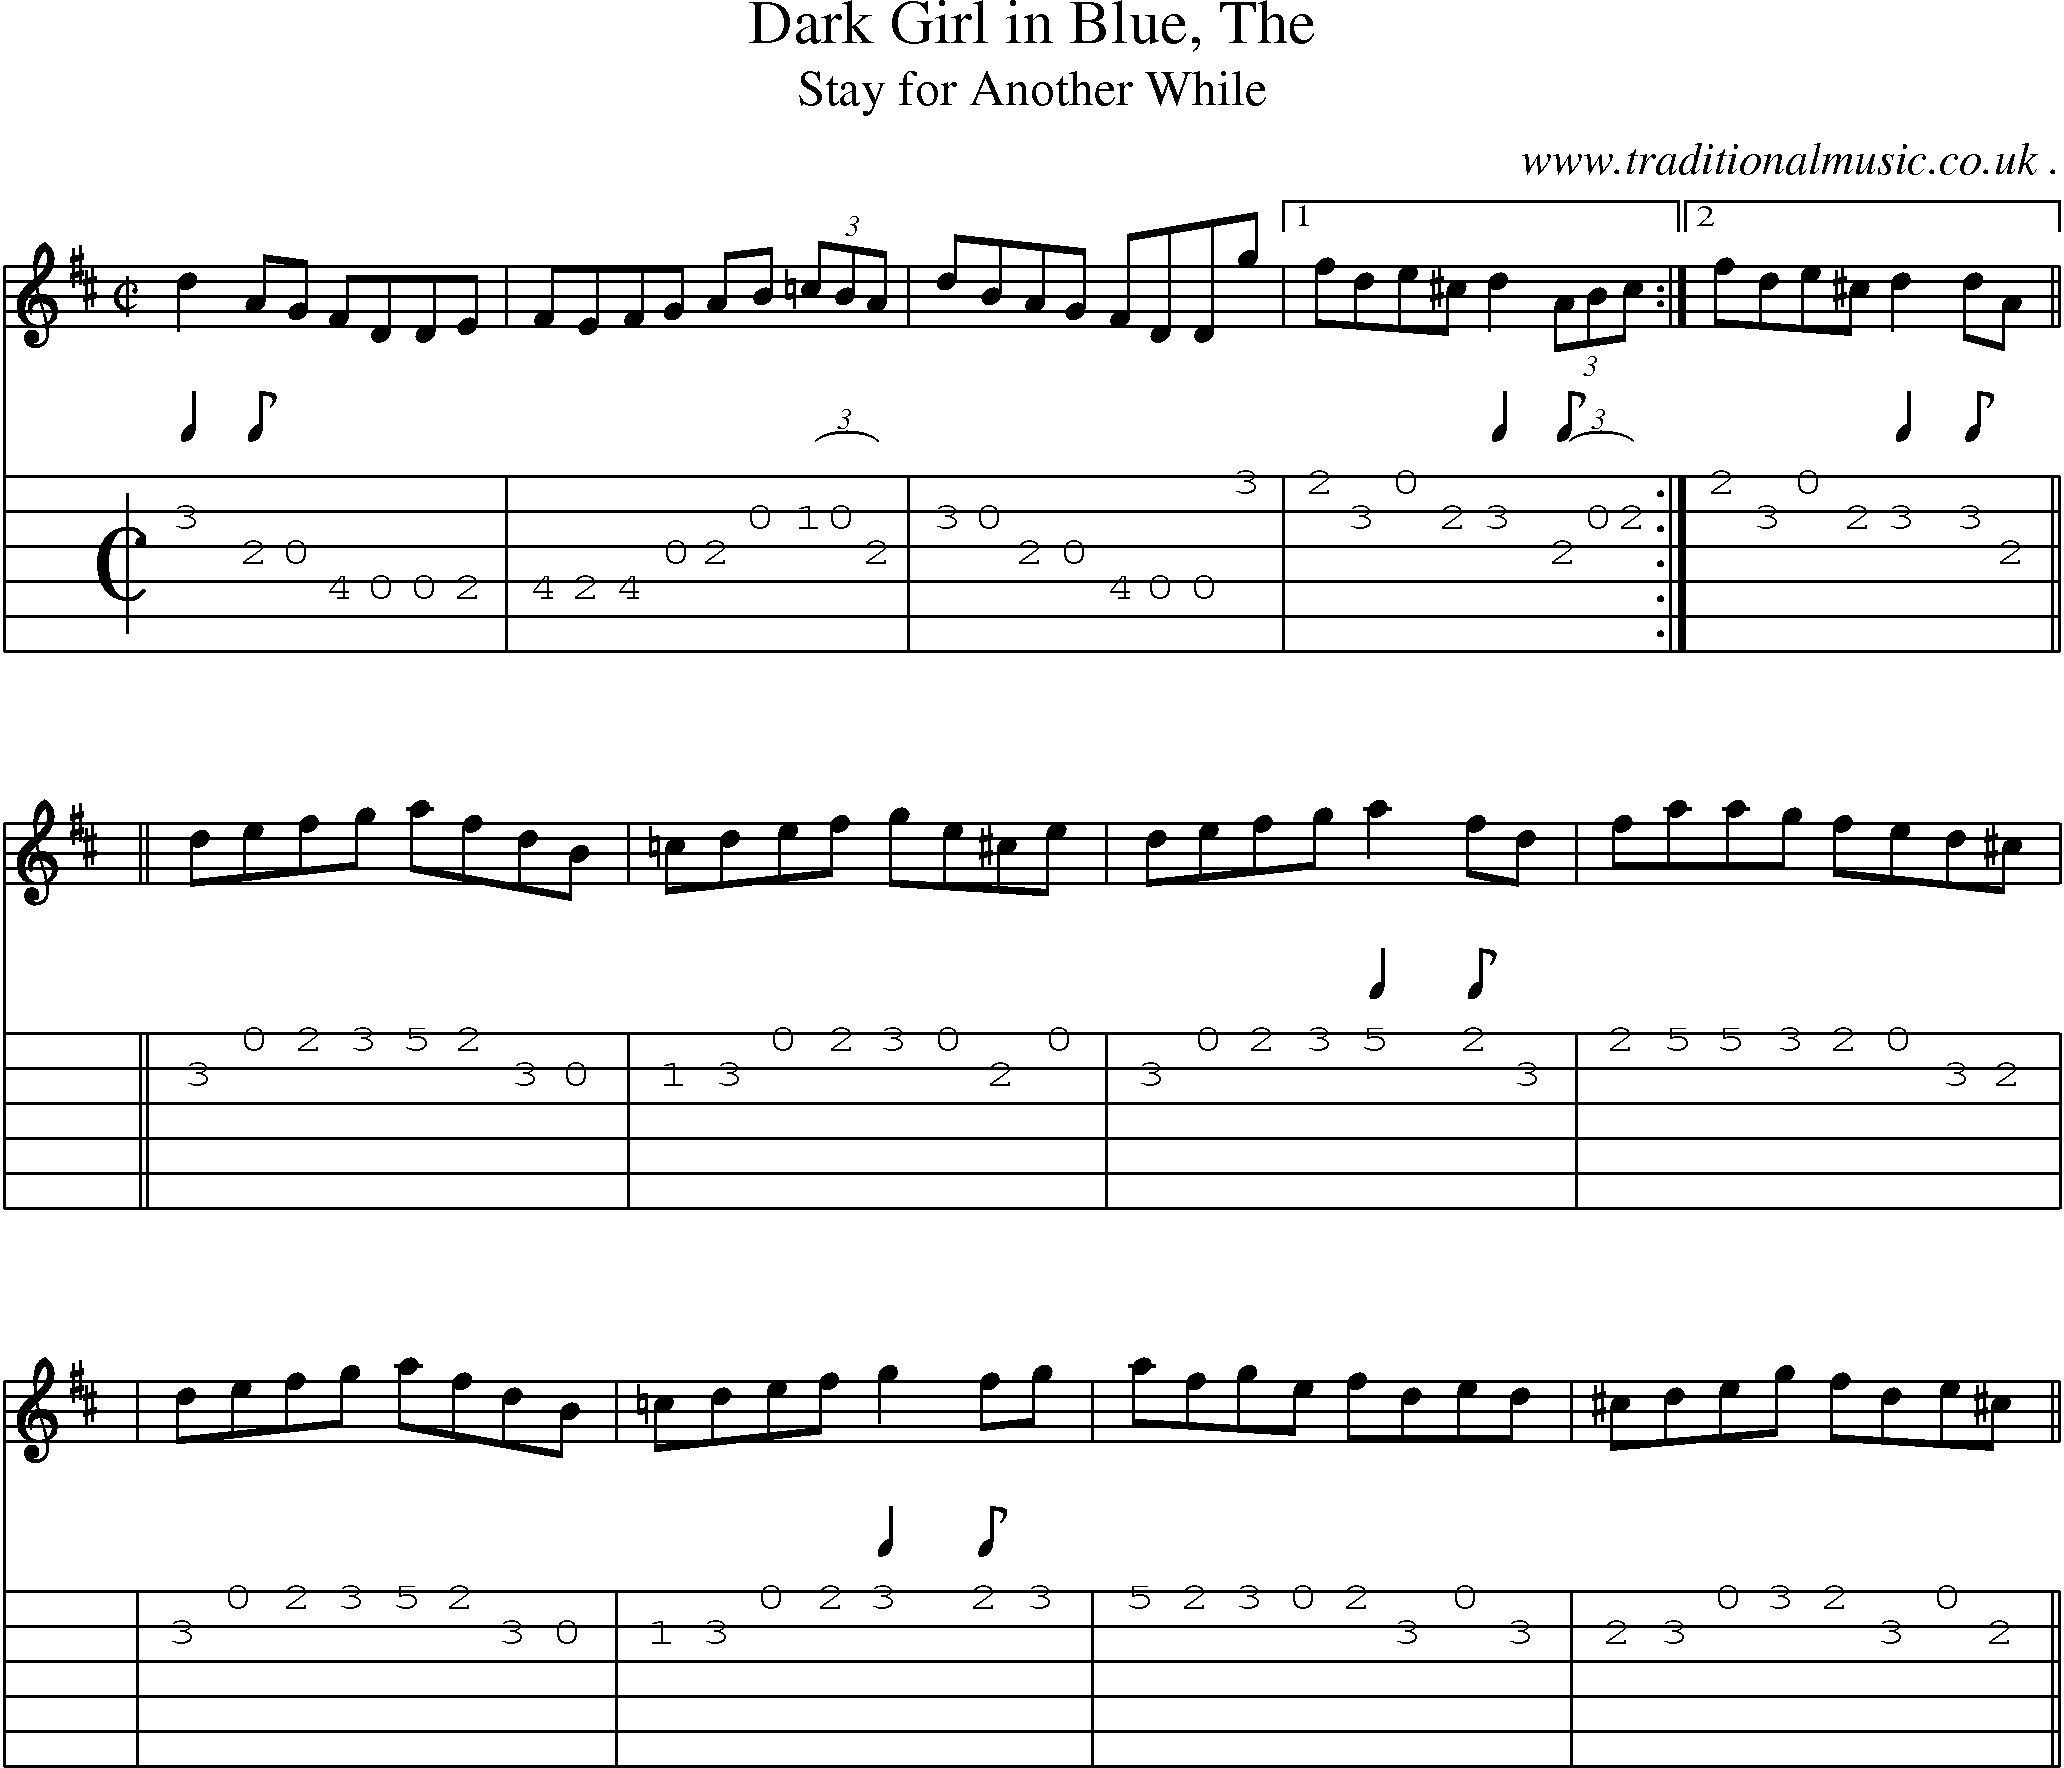 Sheet-music  score, Chords and Guitar Tabs for Dark Girl In Blue The